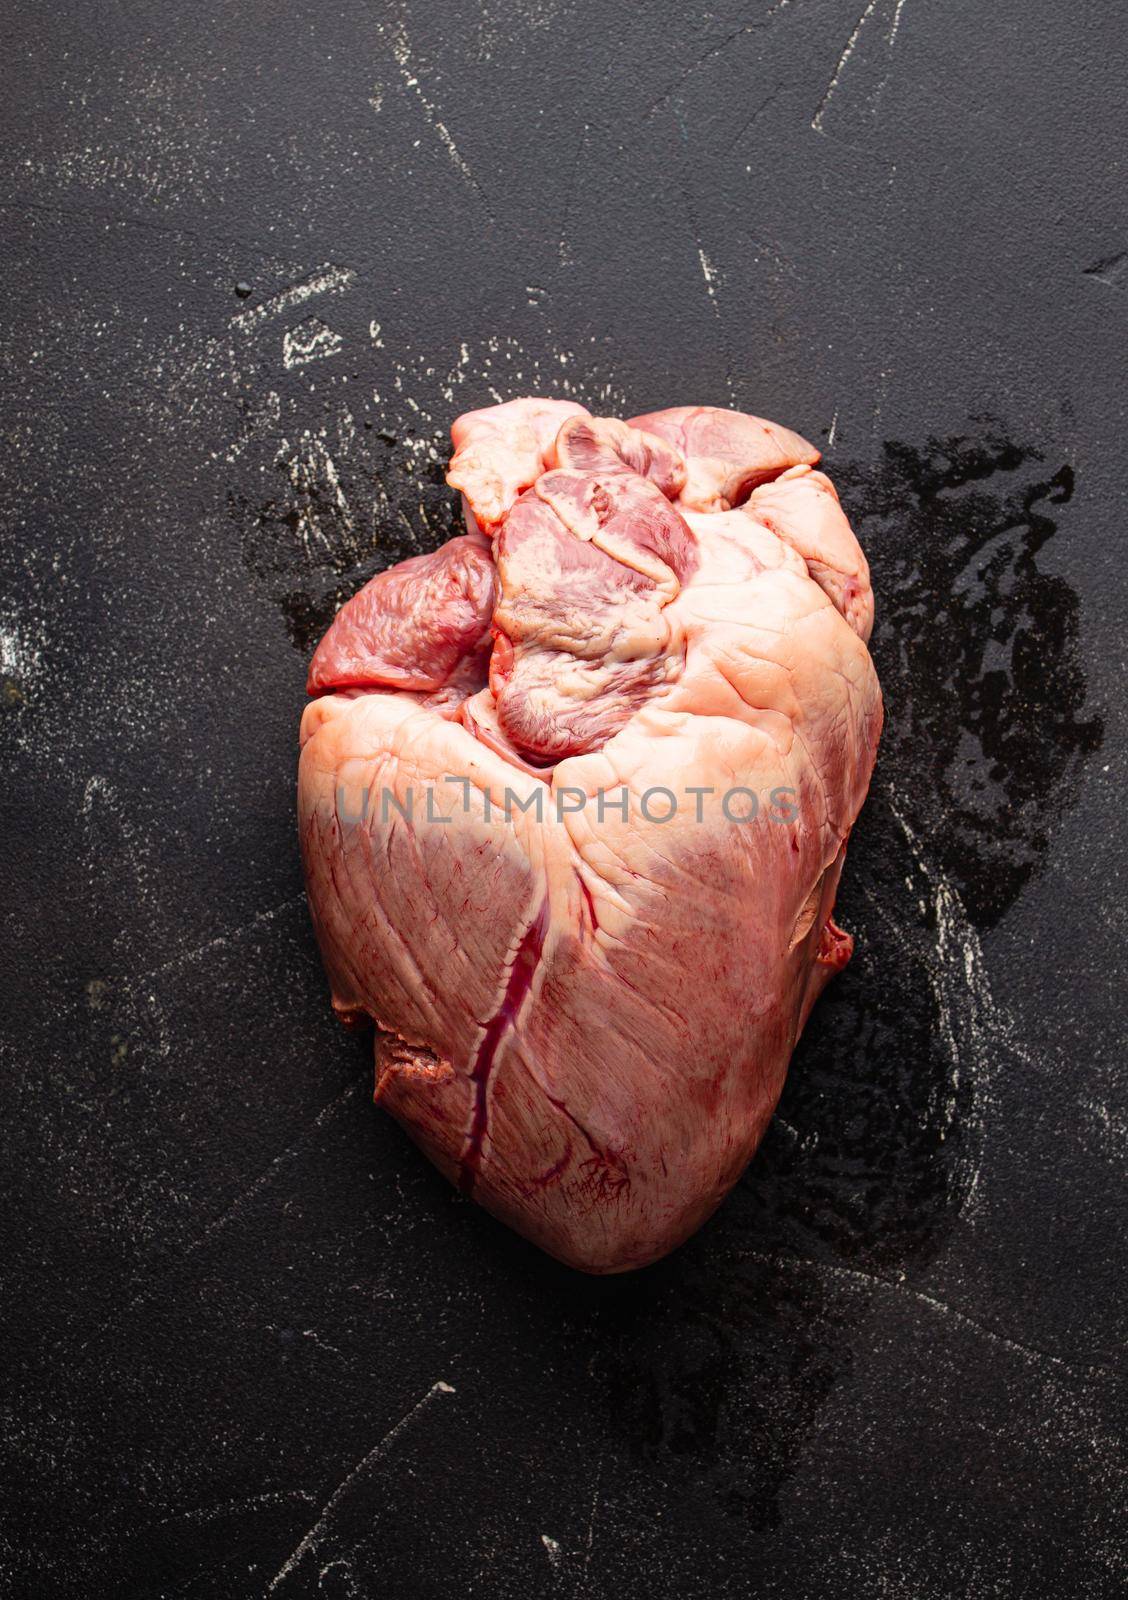 Raw uncooked whole beef or pork heart on black rustic stone background from above, offal and variety meats